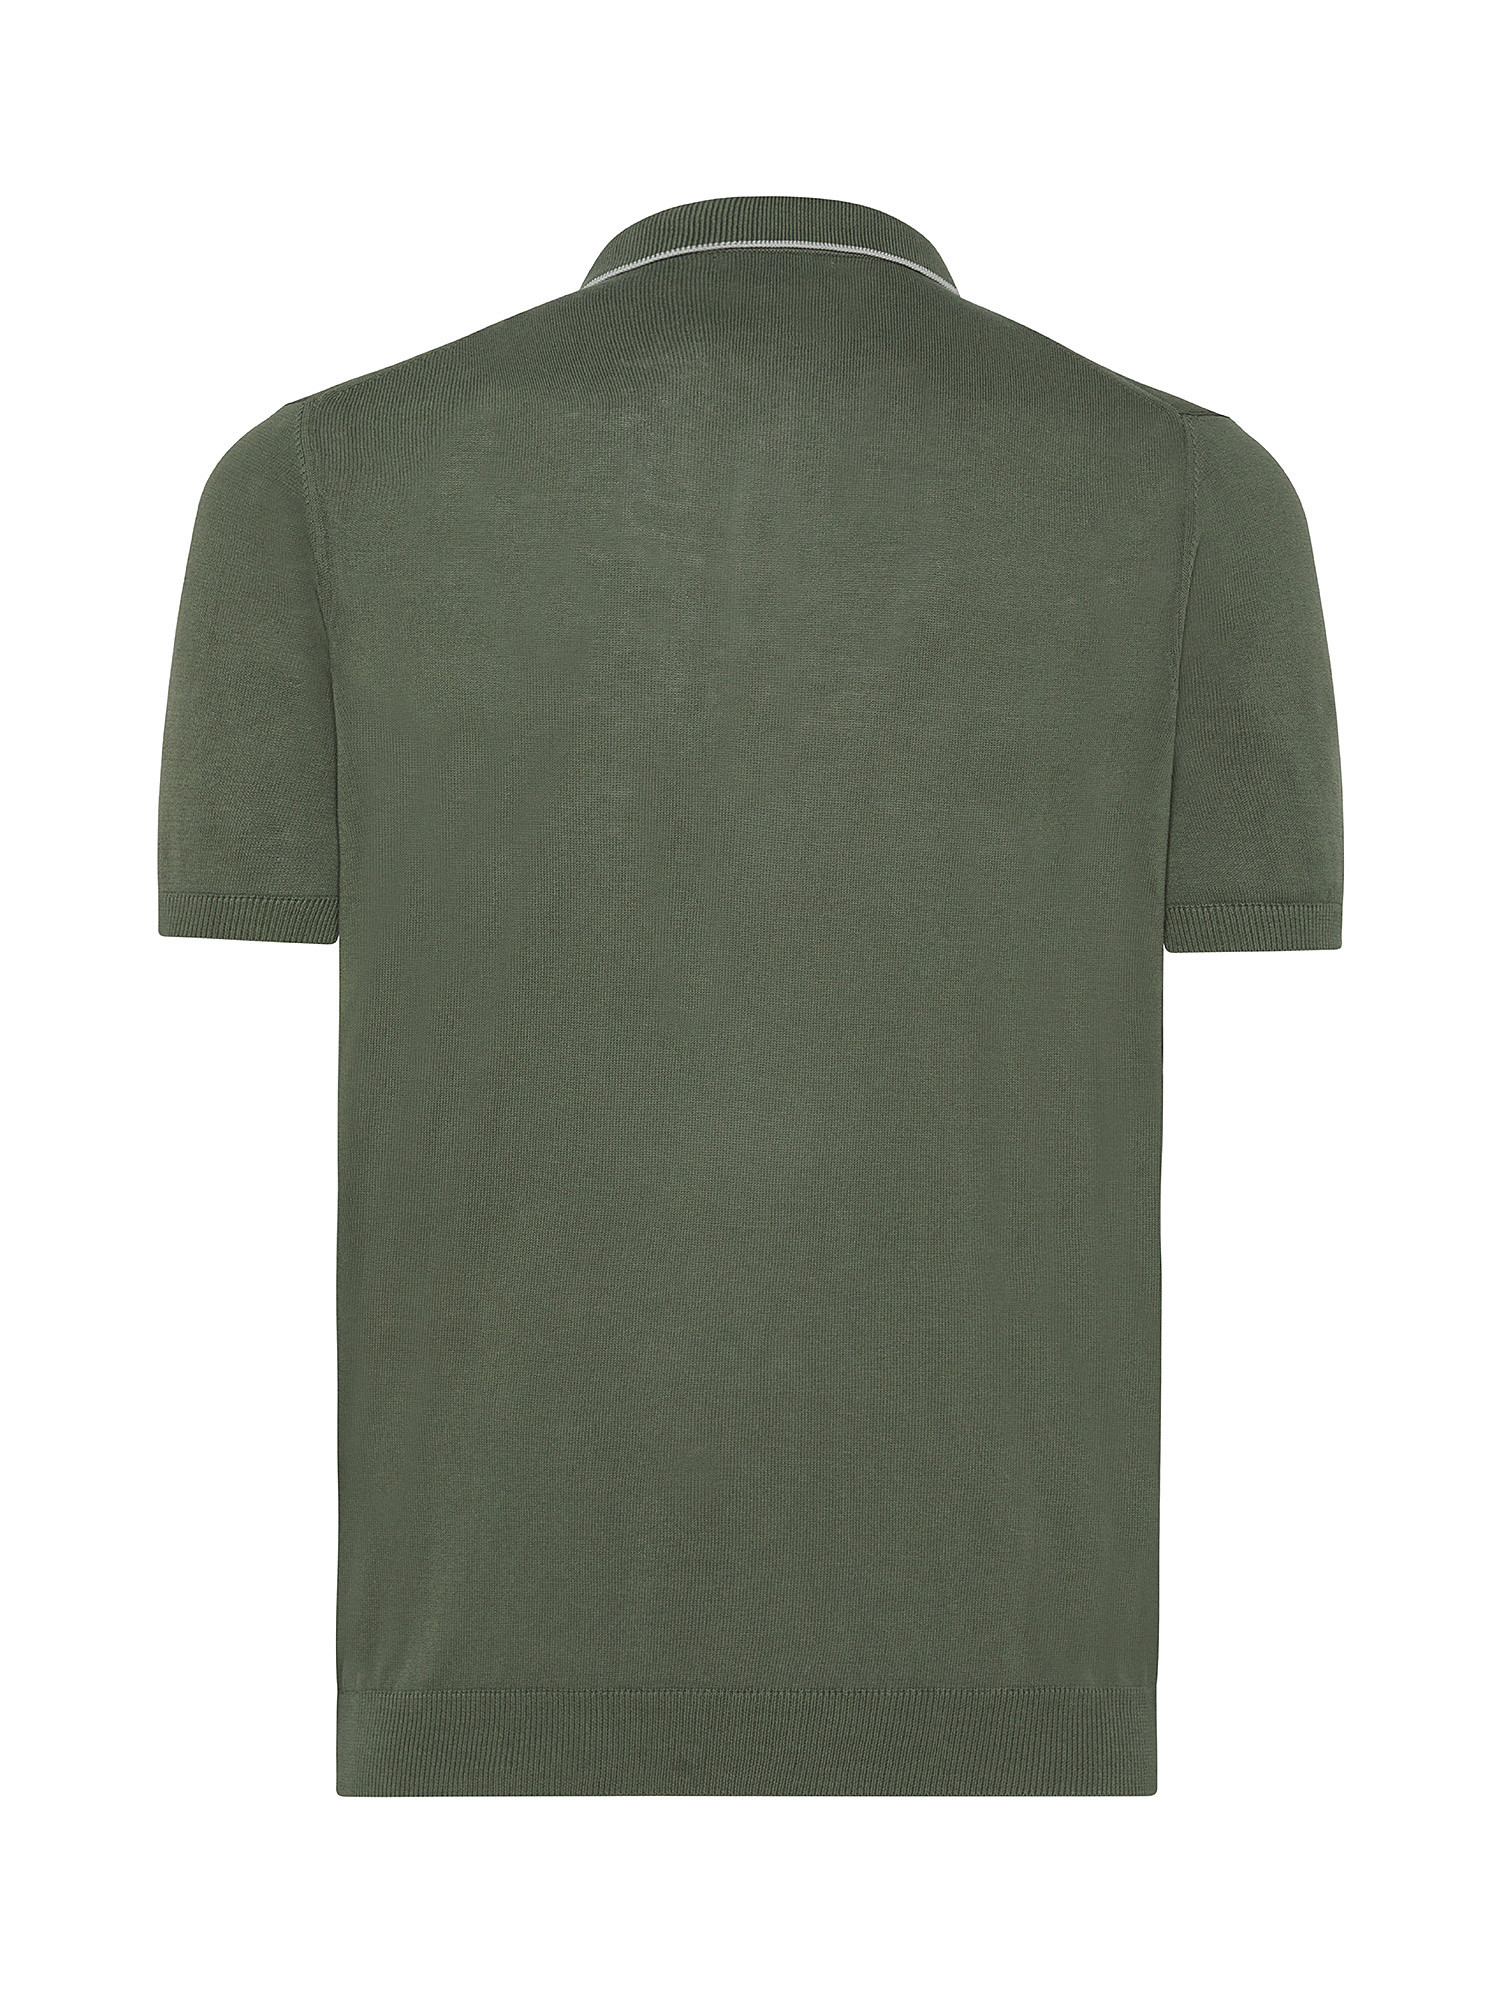 Luca D'Altieri - Cotton crepe polo shirt, Green, large image number 1